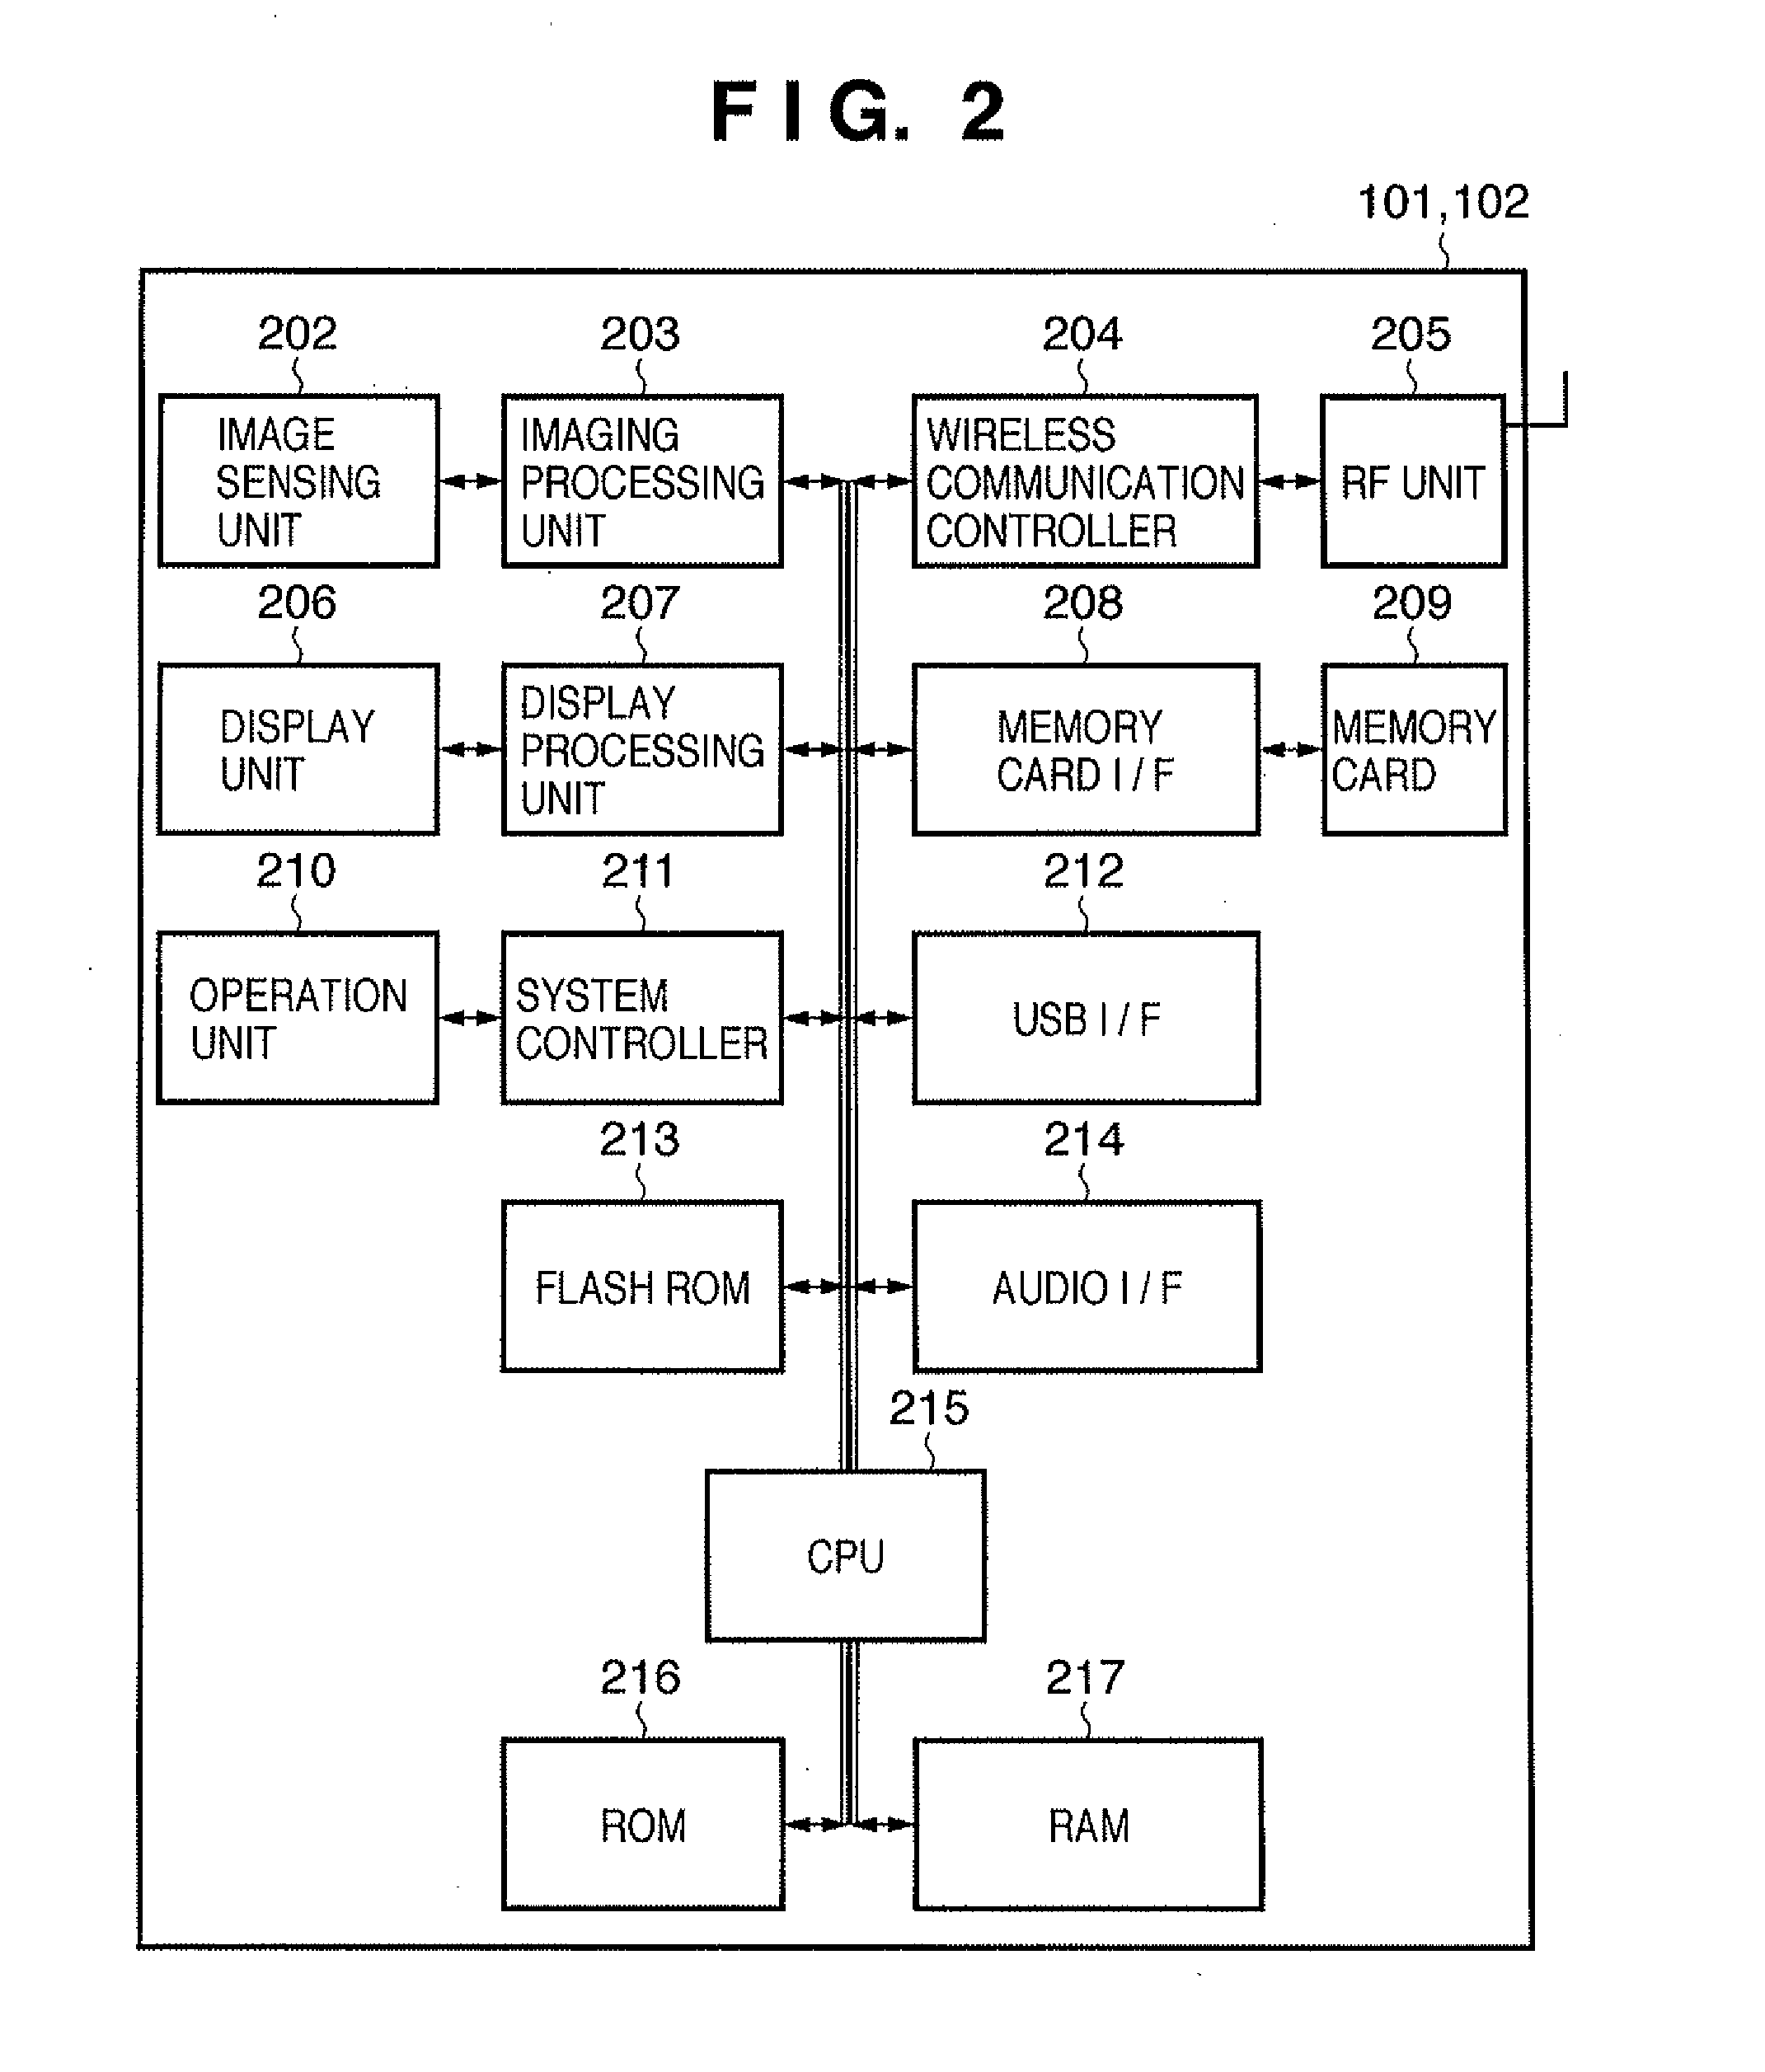 Communication apparatus and method for wi-fi protected setup in adhoc network